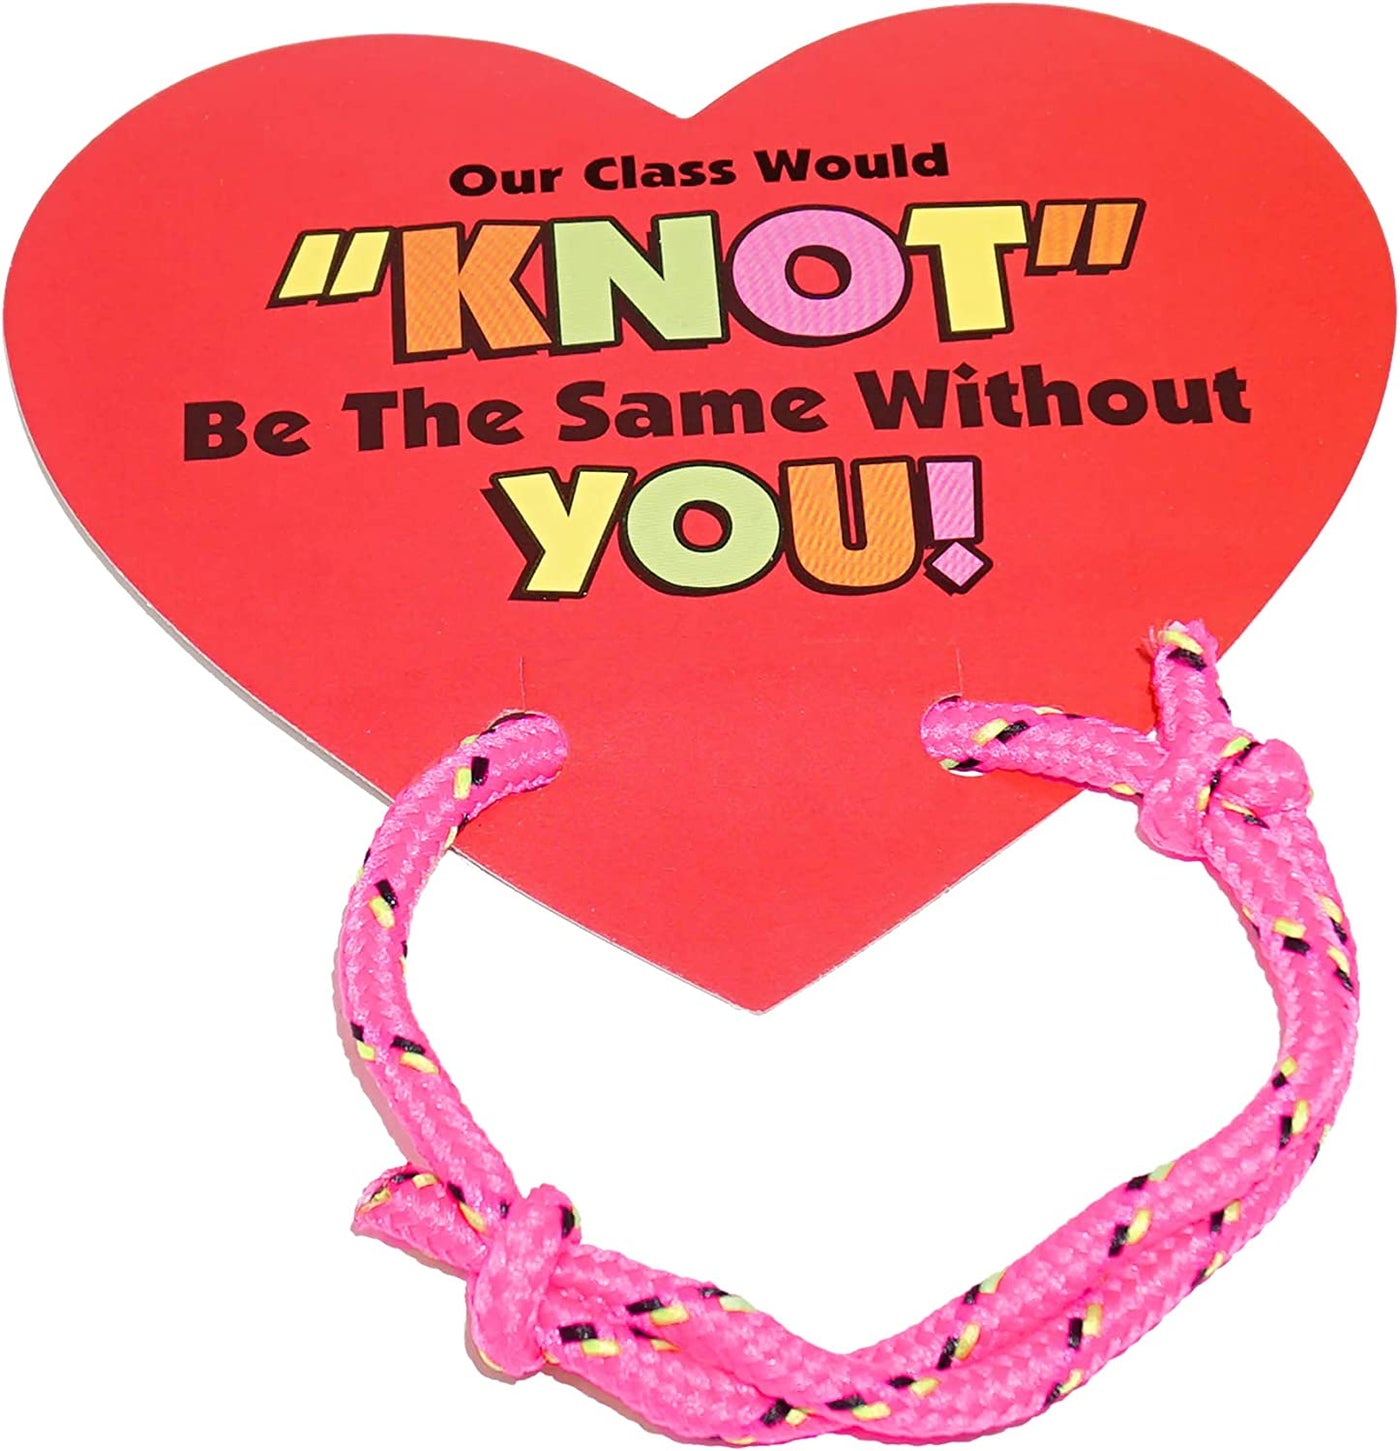 Valentines Knot Bracelets with Cards (48 Pack) "Our Class Will Knot Be The Same Without You" - Valentine’s Day Party Favors From Teacher to Class, School, Students, Classroom Exchange By 4E’s Novelty